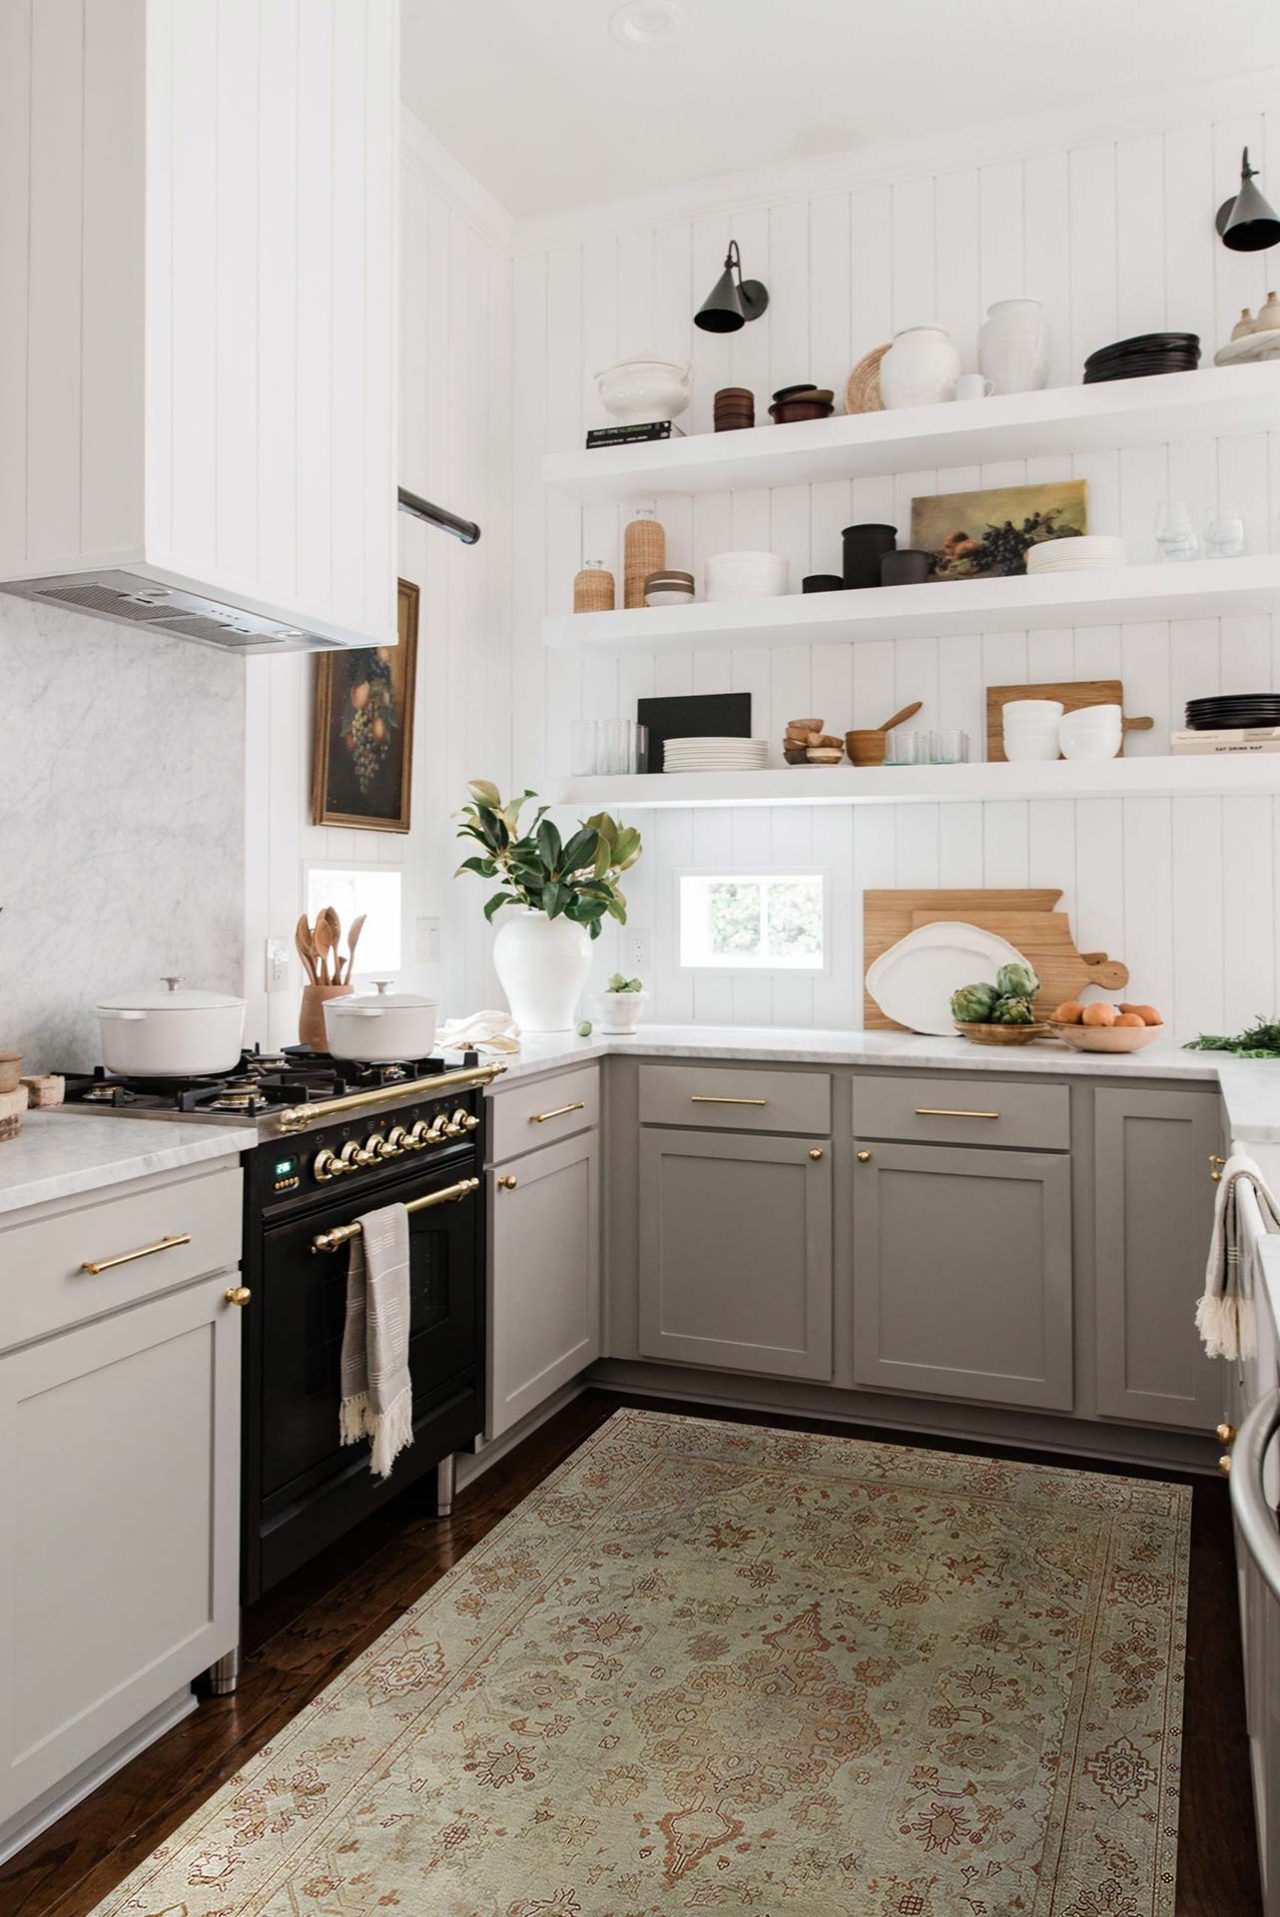 6 Kitchen Trend Ideas You'll Want To Try in 2021 by DLB